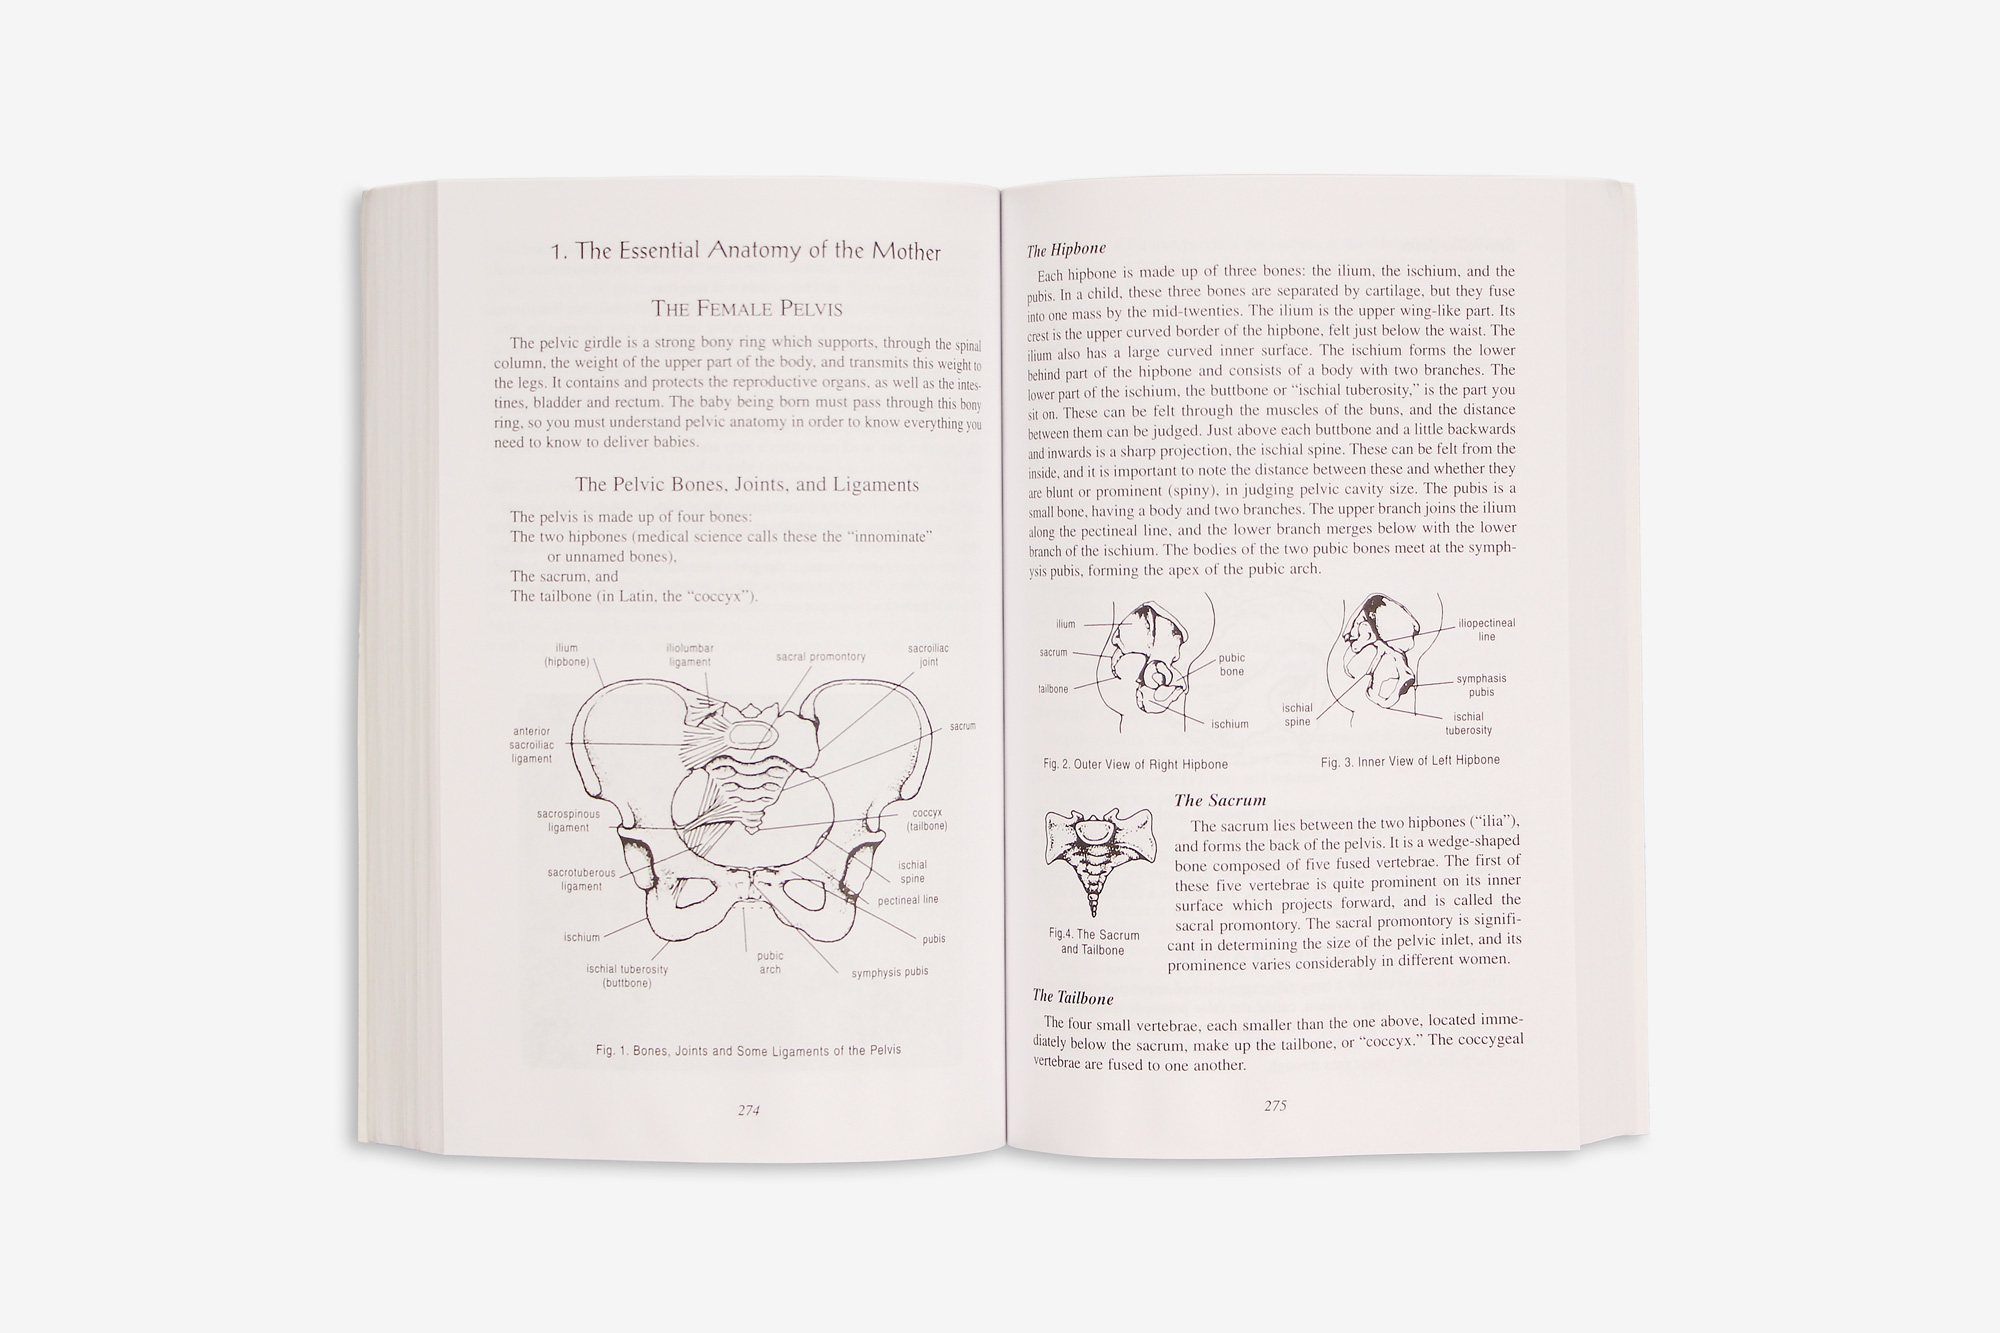 Ina May Gaskin's book "Spiritual Midwifery" showing the skeletal anatomy of the female pelvis.